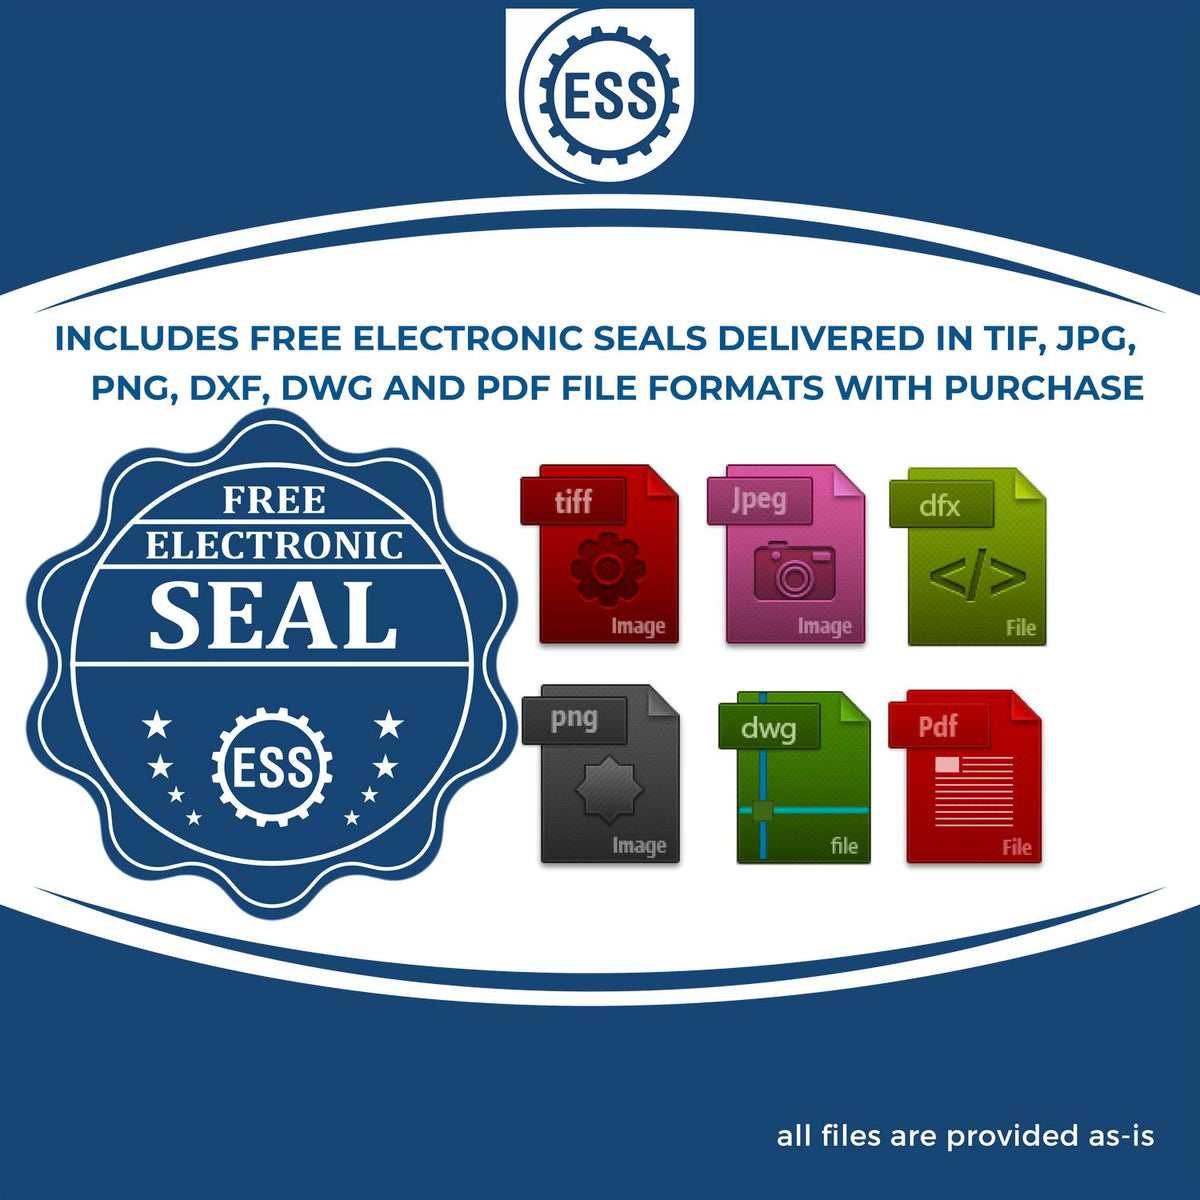 An infographic for the free electronic seal for the State of Nevada Long Reach Architectural Embossing Seal illustrating the different file type icons such as DXF, DWG, TIF, JPG and PNG.